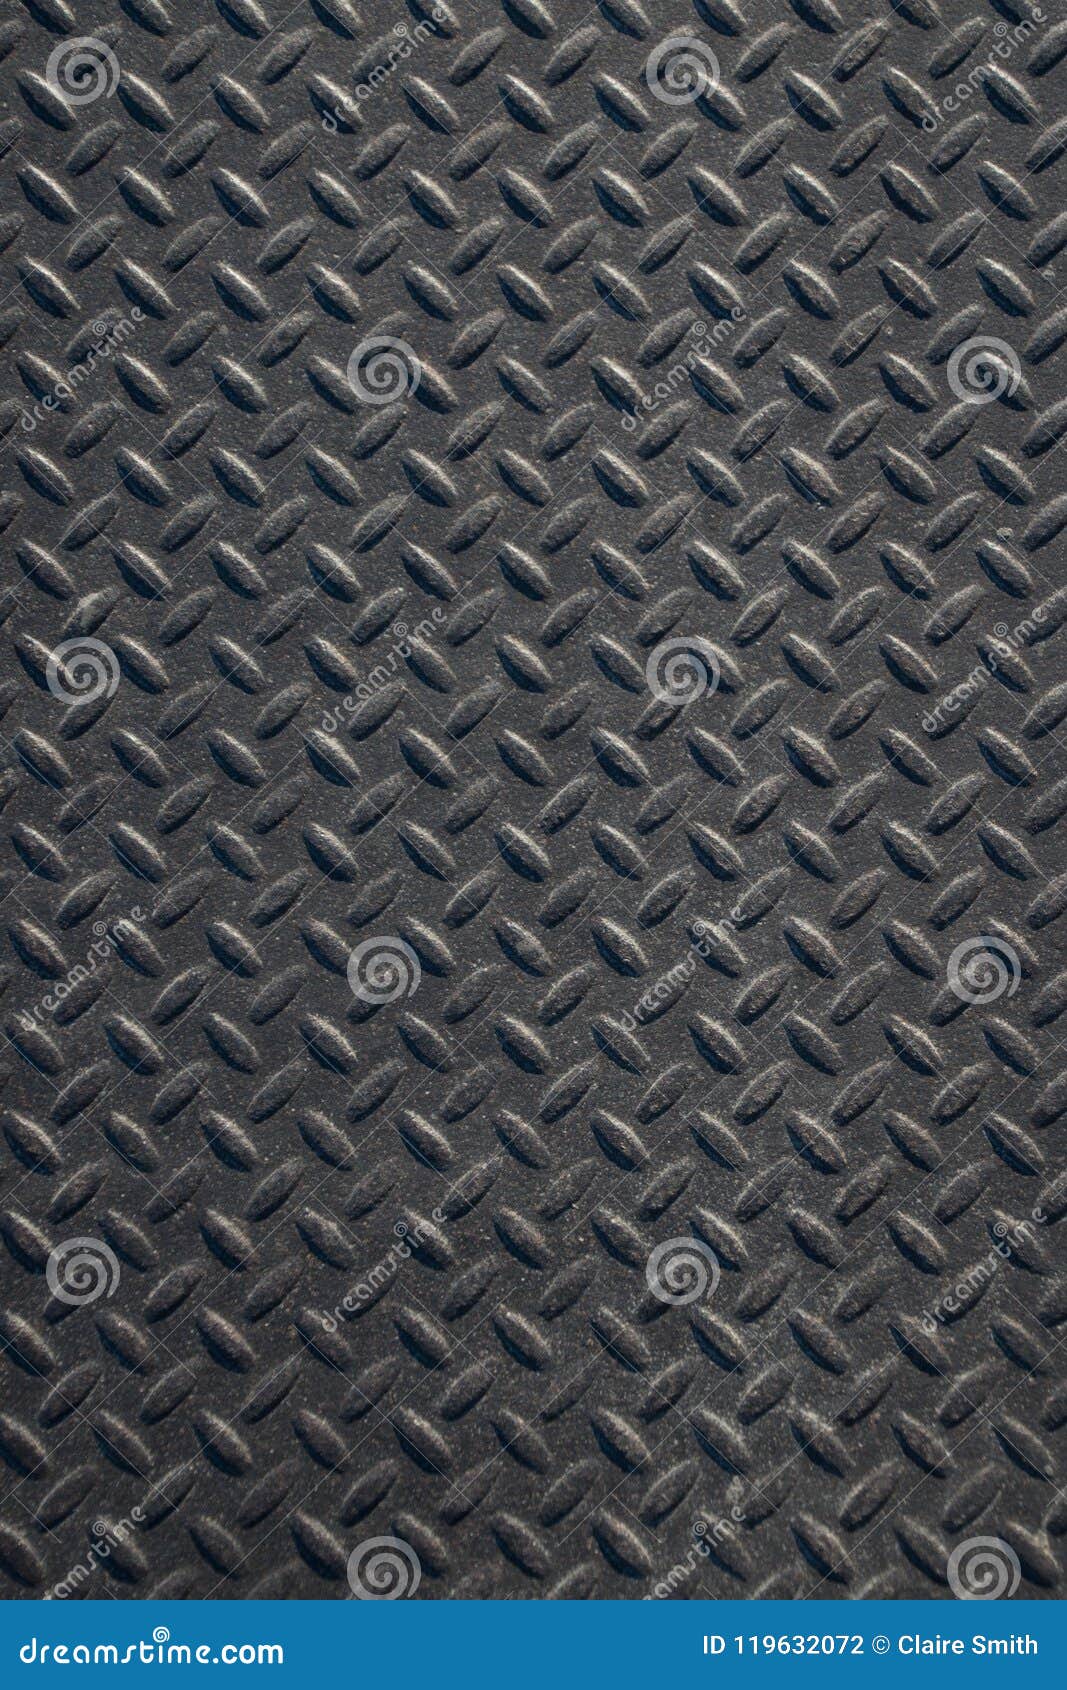 Black Metal Texture Wallpaper Black Metal Diamond Plate Texture Background  Stock Photo Picture And Royalty Free Image Image 143518416